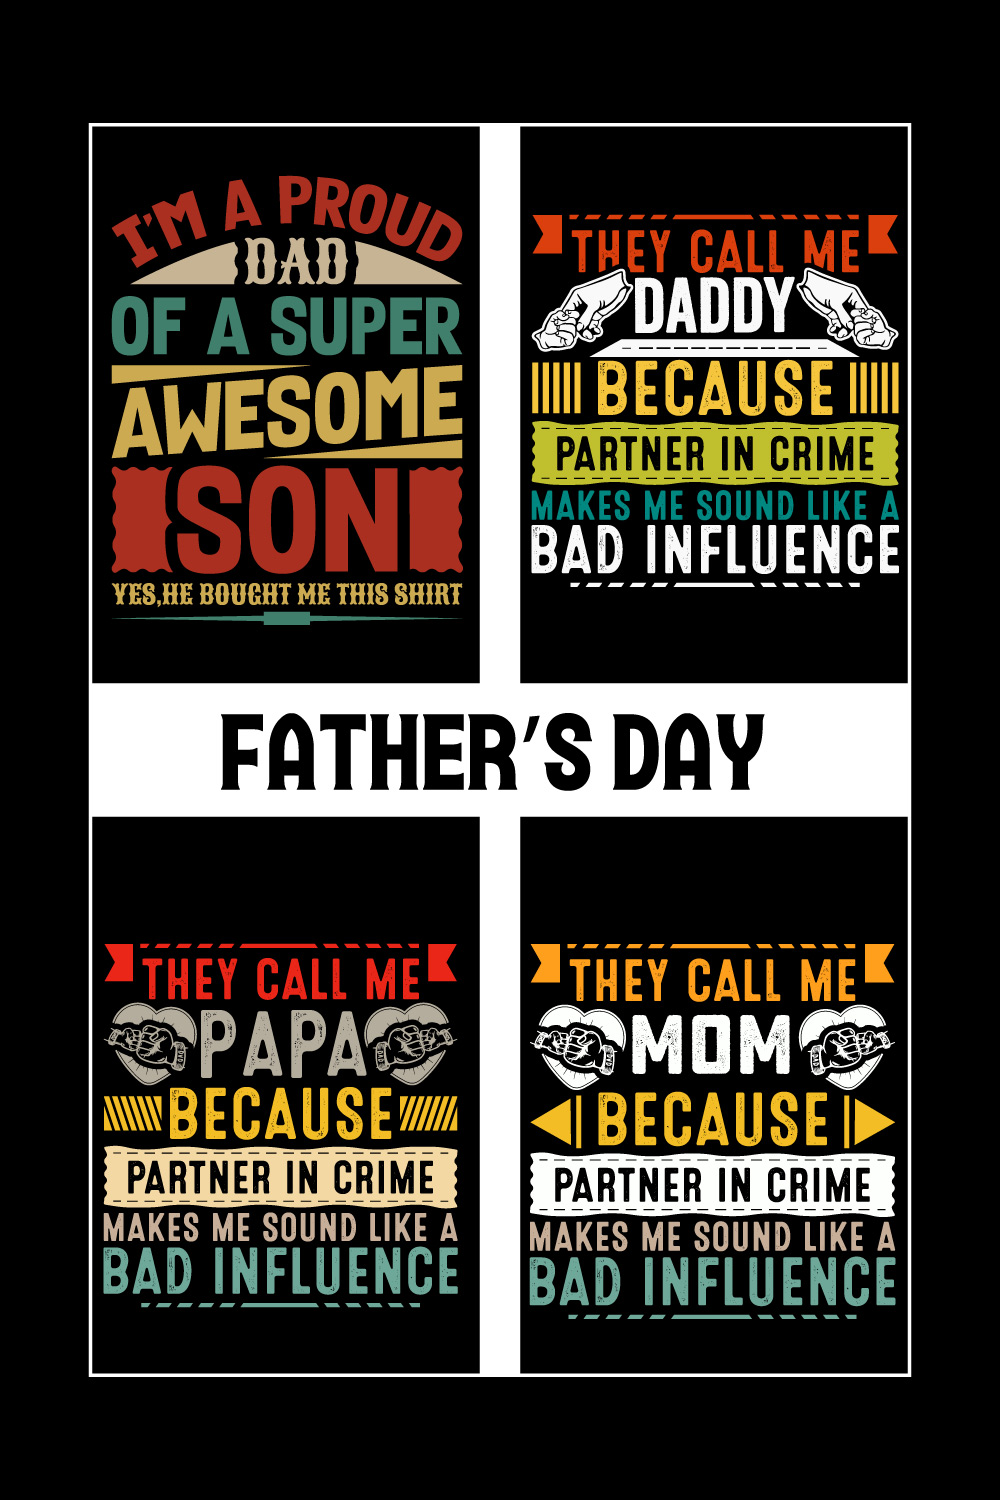 fathers day t shirt dad t shirt design father day tshirt happy fathers day t shirt design ideas dad day papa son fathers day shirt ideas for family 8 169